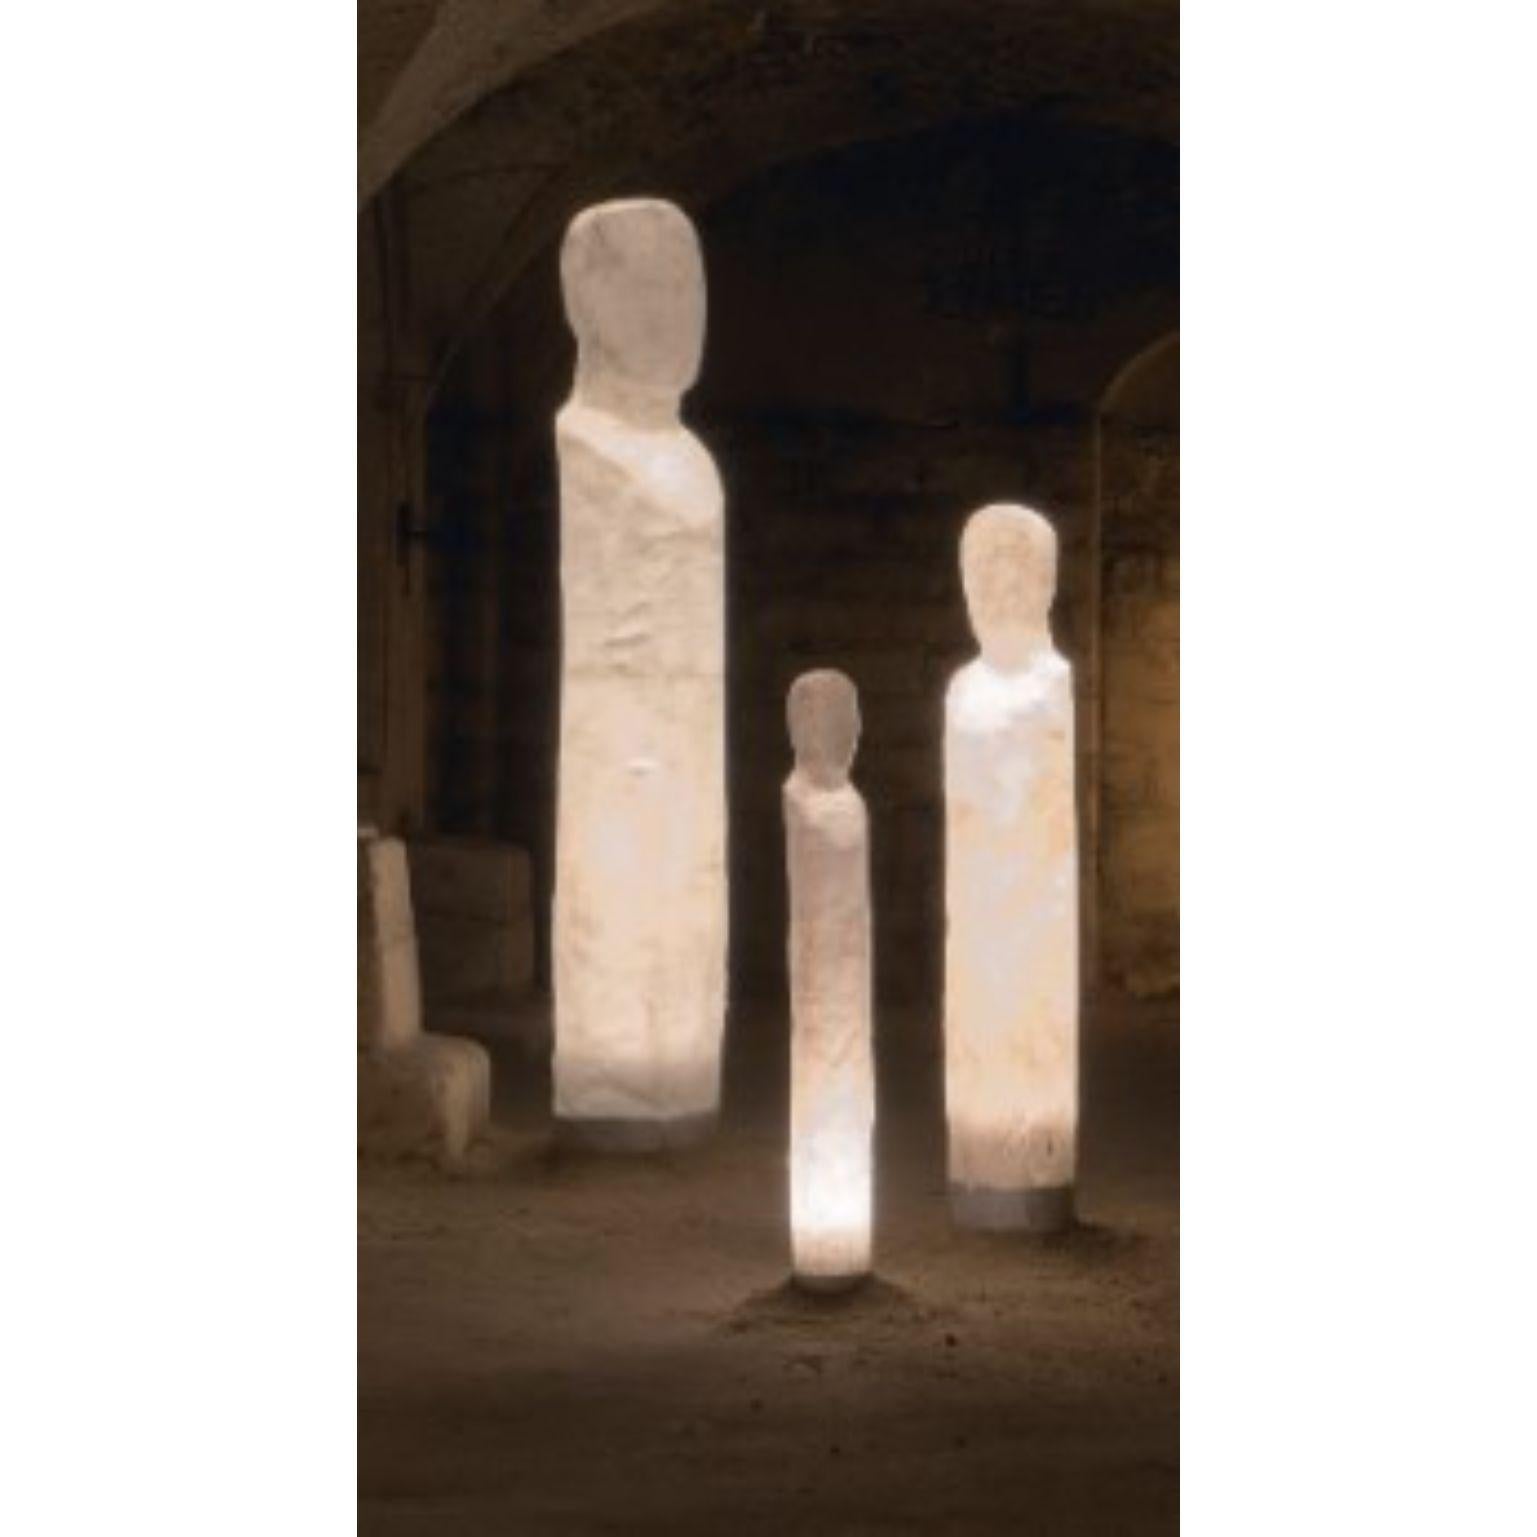 Belgian Set of 3 Anonymus Family, Light Sculptures by Atelier Haute Cuisine